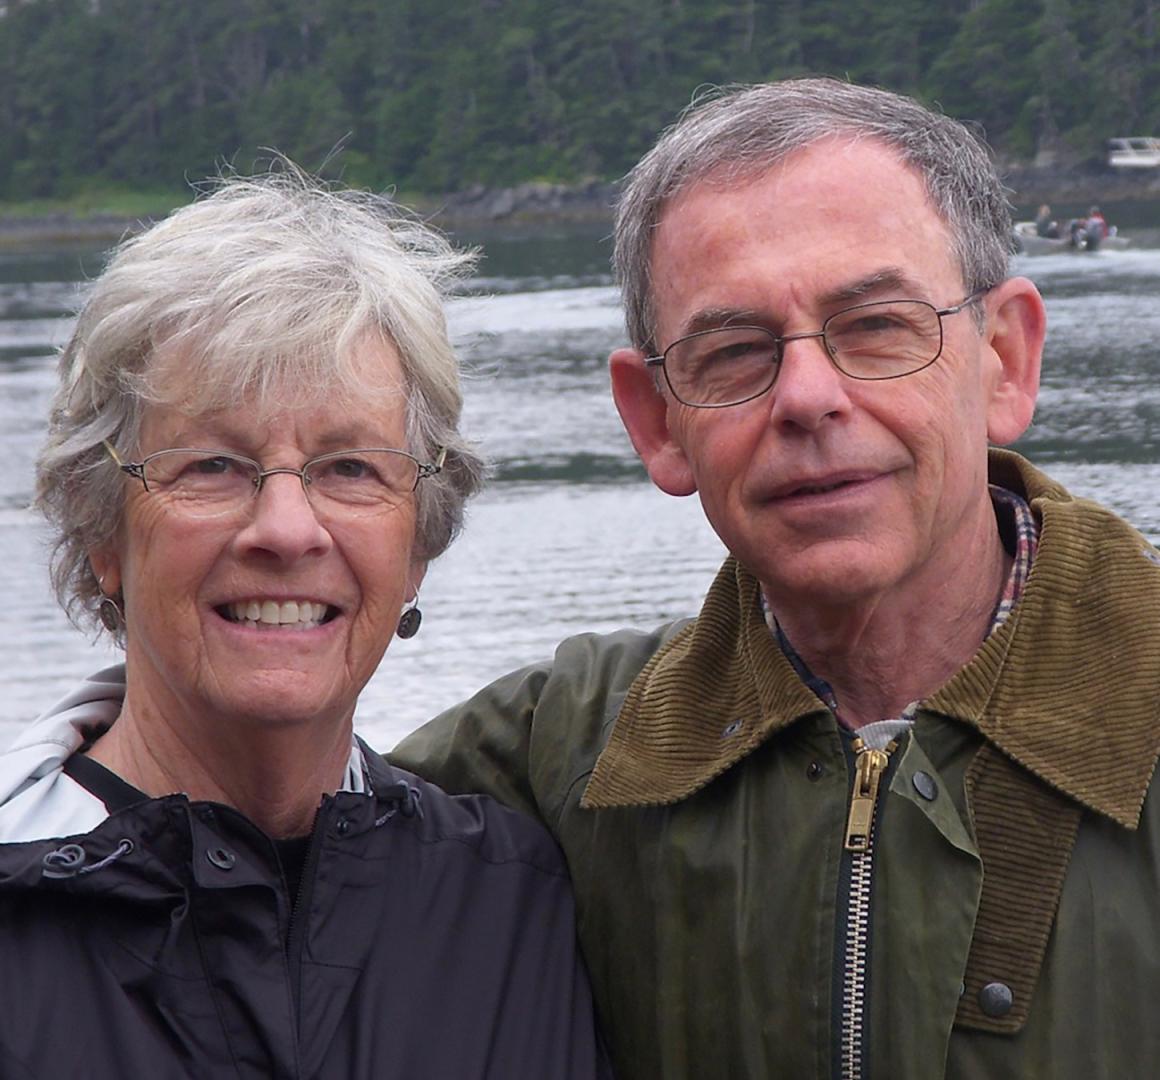 Myles Cohen with his wife, pictured in front of a river.